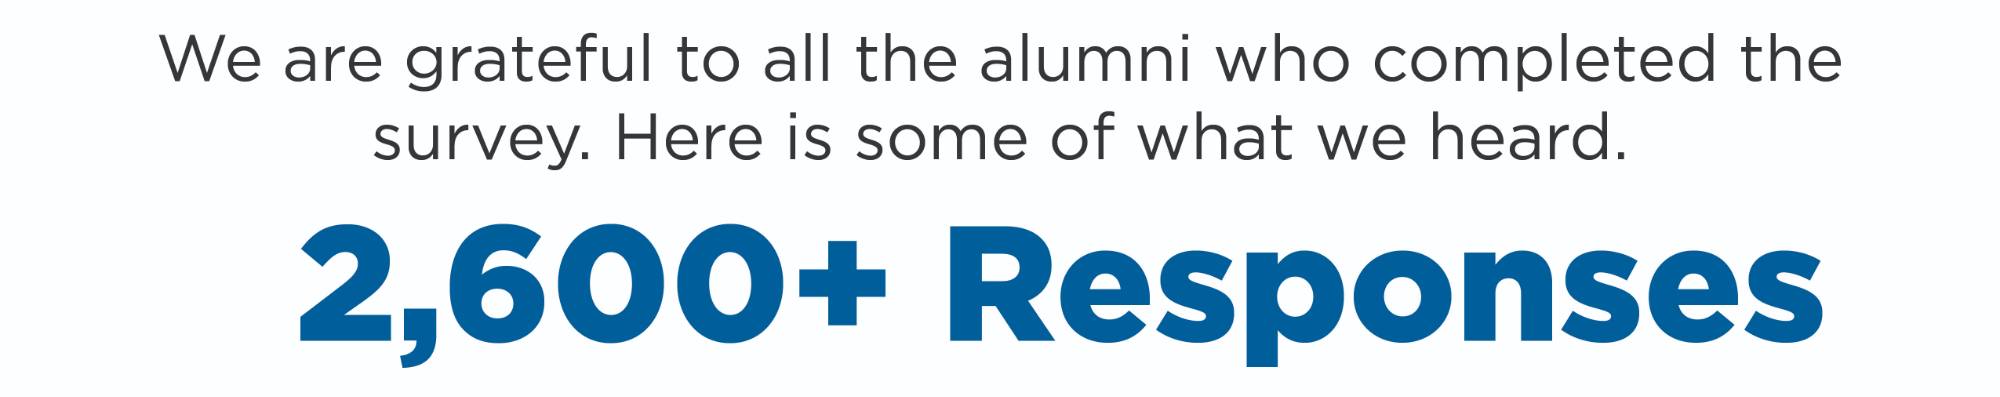 We are grateful to all the alumni who completed the survey. Here is some of what we heard from the 2,600+ Responses.